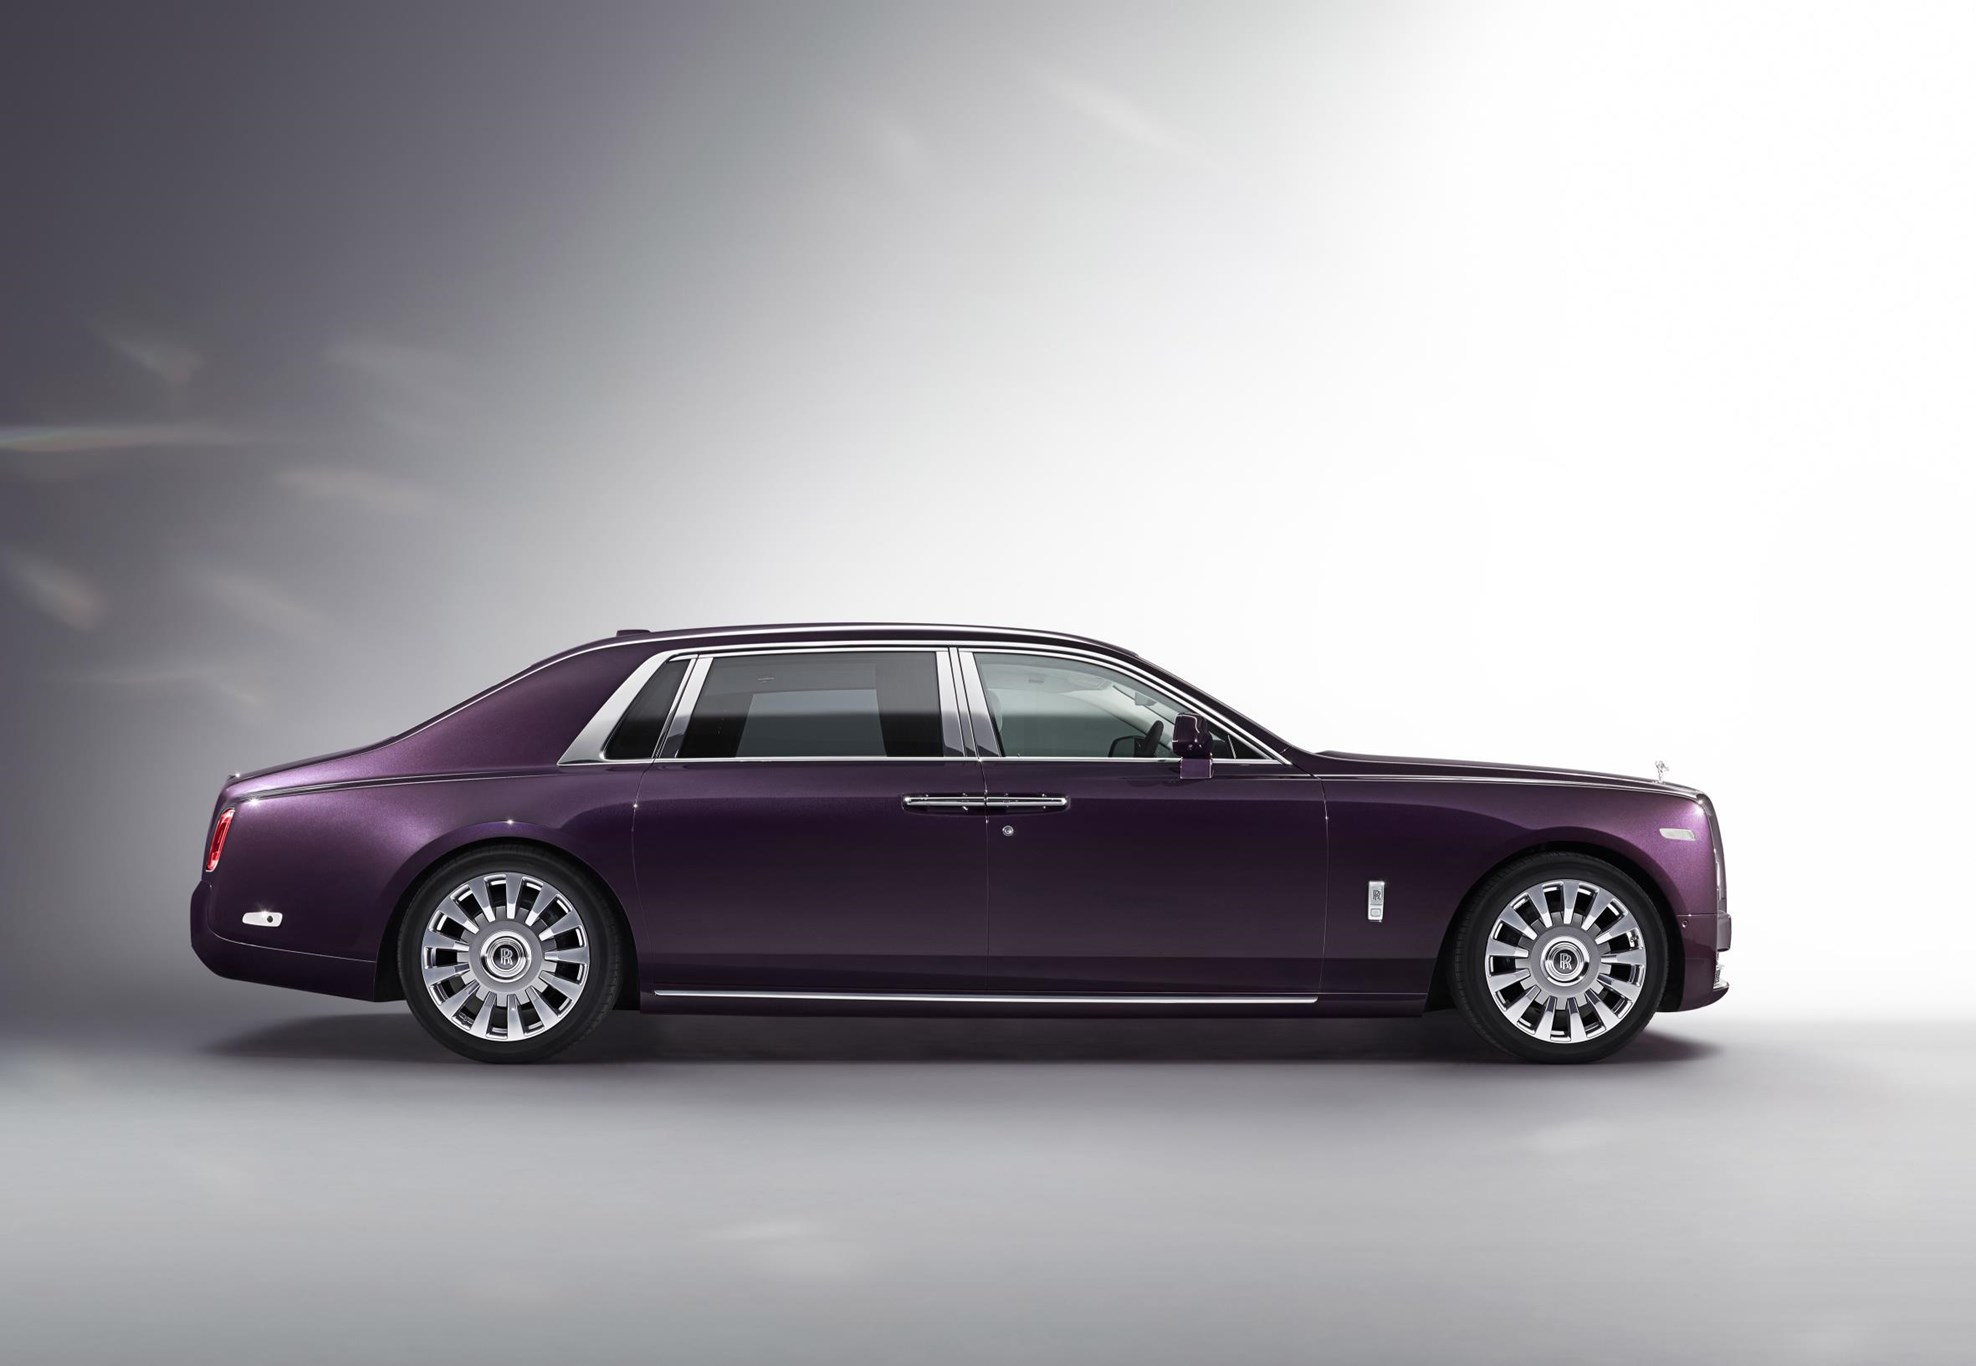 RollsRoyce Spectre The RollsRoyce That Changes Everything